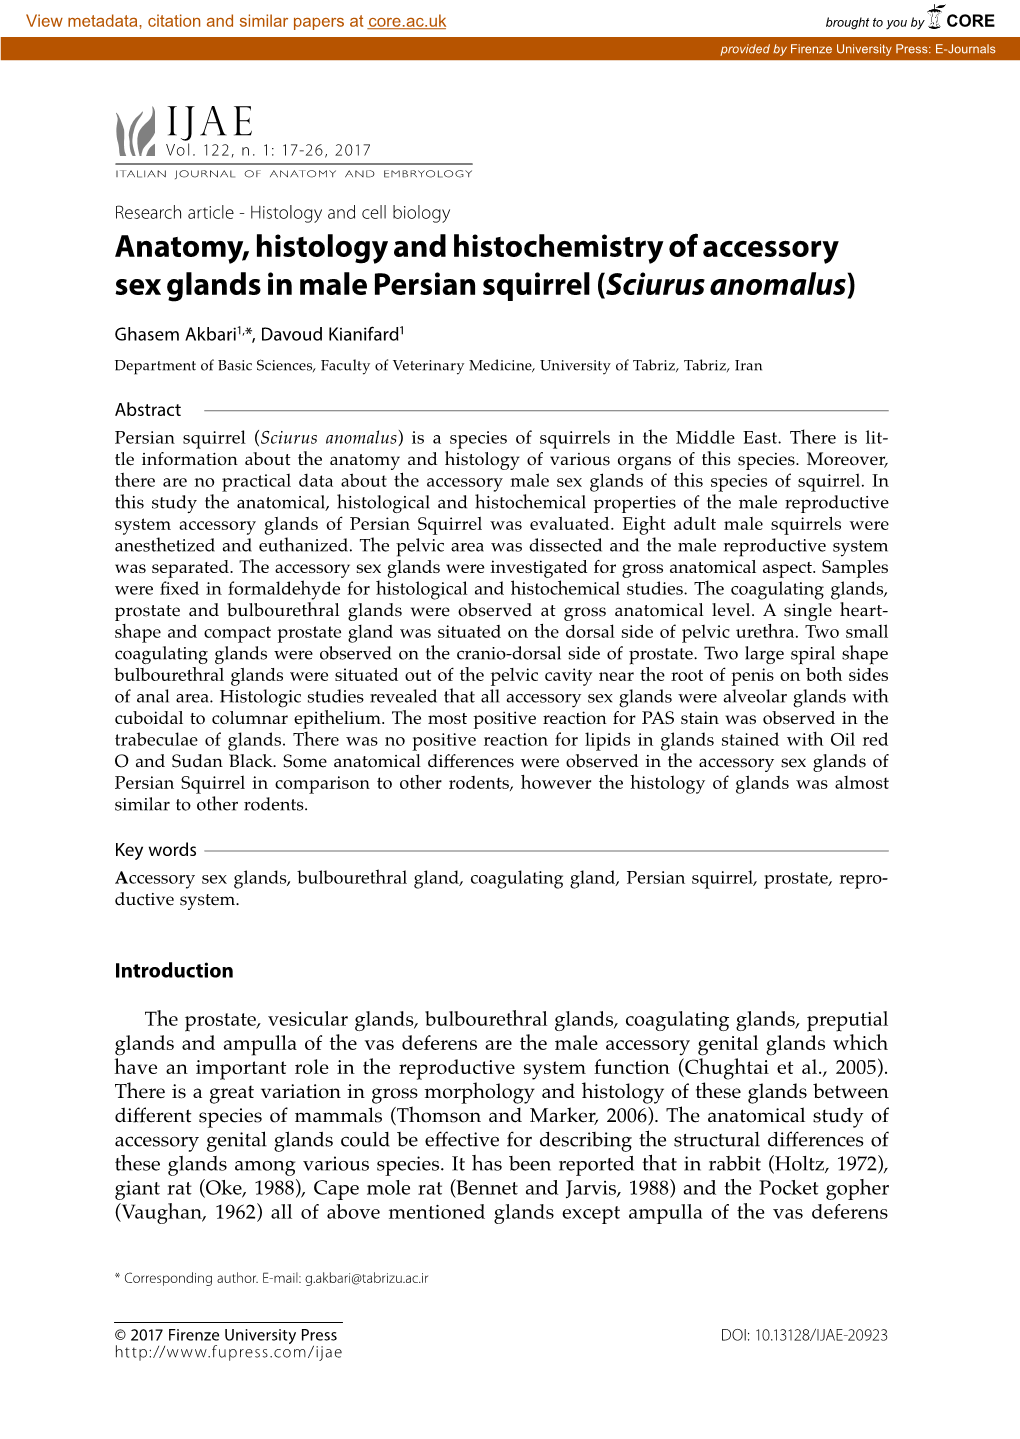 Anatomy, Histology and Histochemistry of Accessory Sex Glands in Male Persian Squirrel (Sciurus Anomalus)